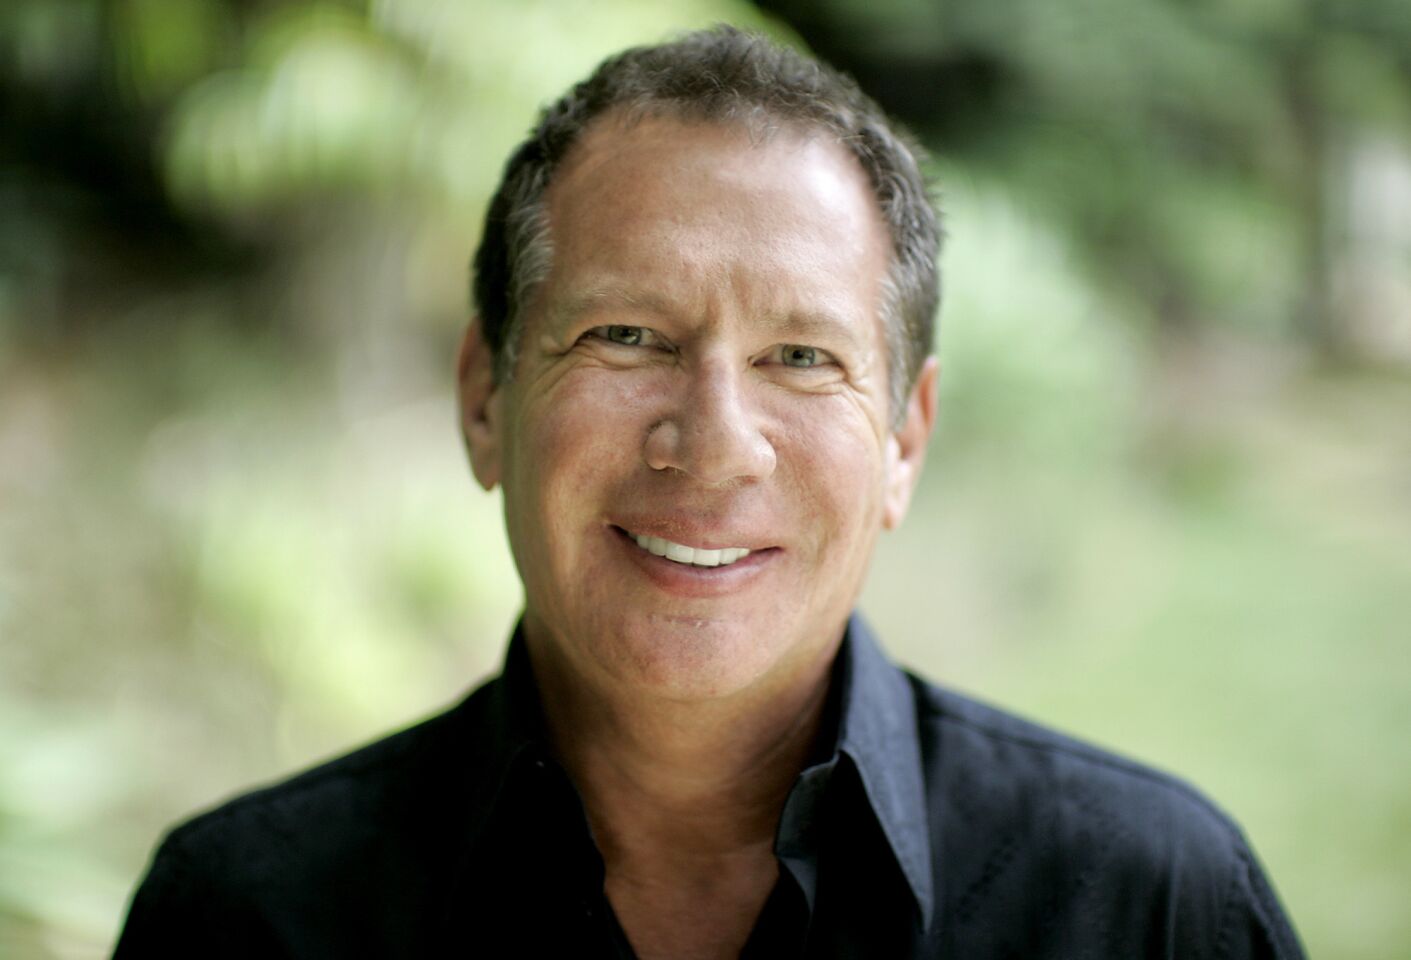 Garry Shandling's comedic career spanned decades, but he is best known for his role as Larry Sanders, the host of a fictional talk show. His sitcom pushed the boundaries of TV, influencing shows such as "The Office" and "Modern Family." He was 66. Full obituary.